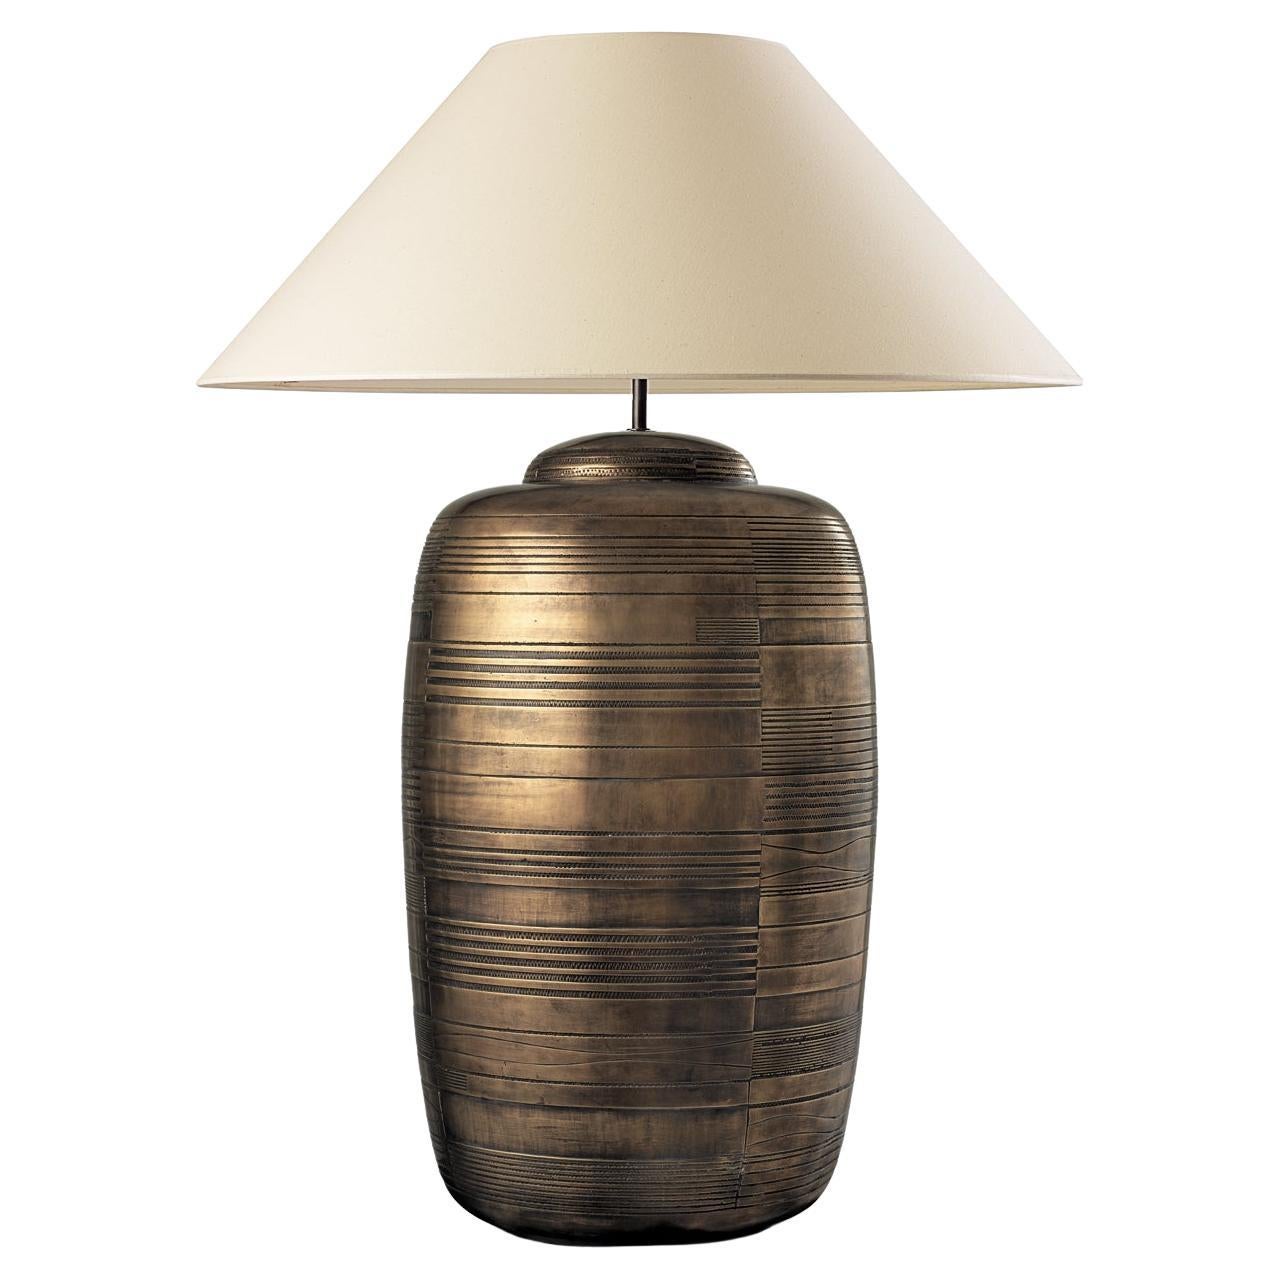 OPIO. Table Lamp in Aged Brass, Modern Art Deco Design Handmade. Shade included For Sale